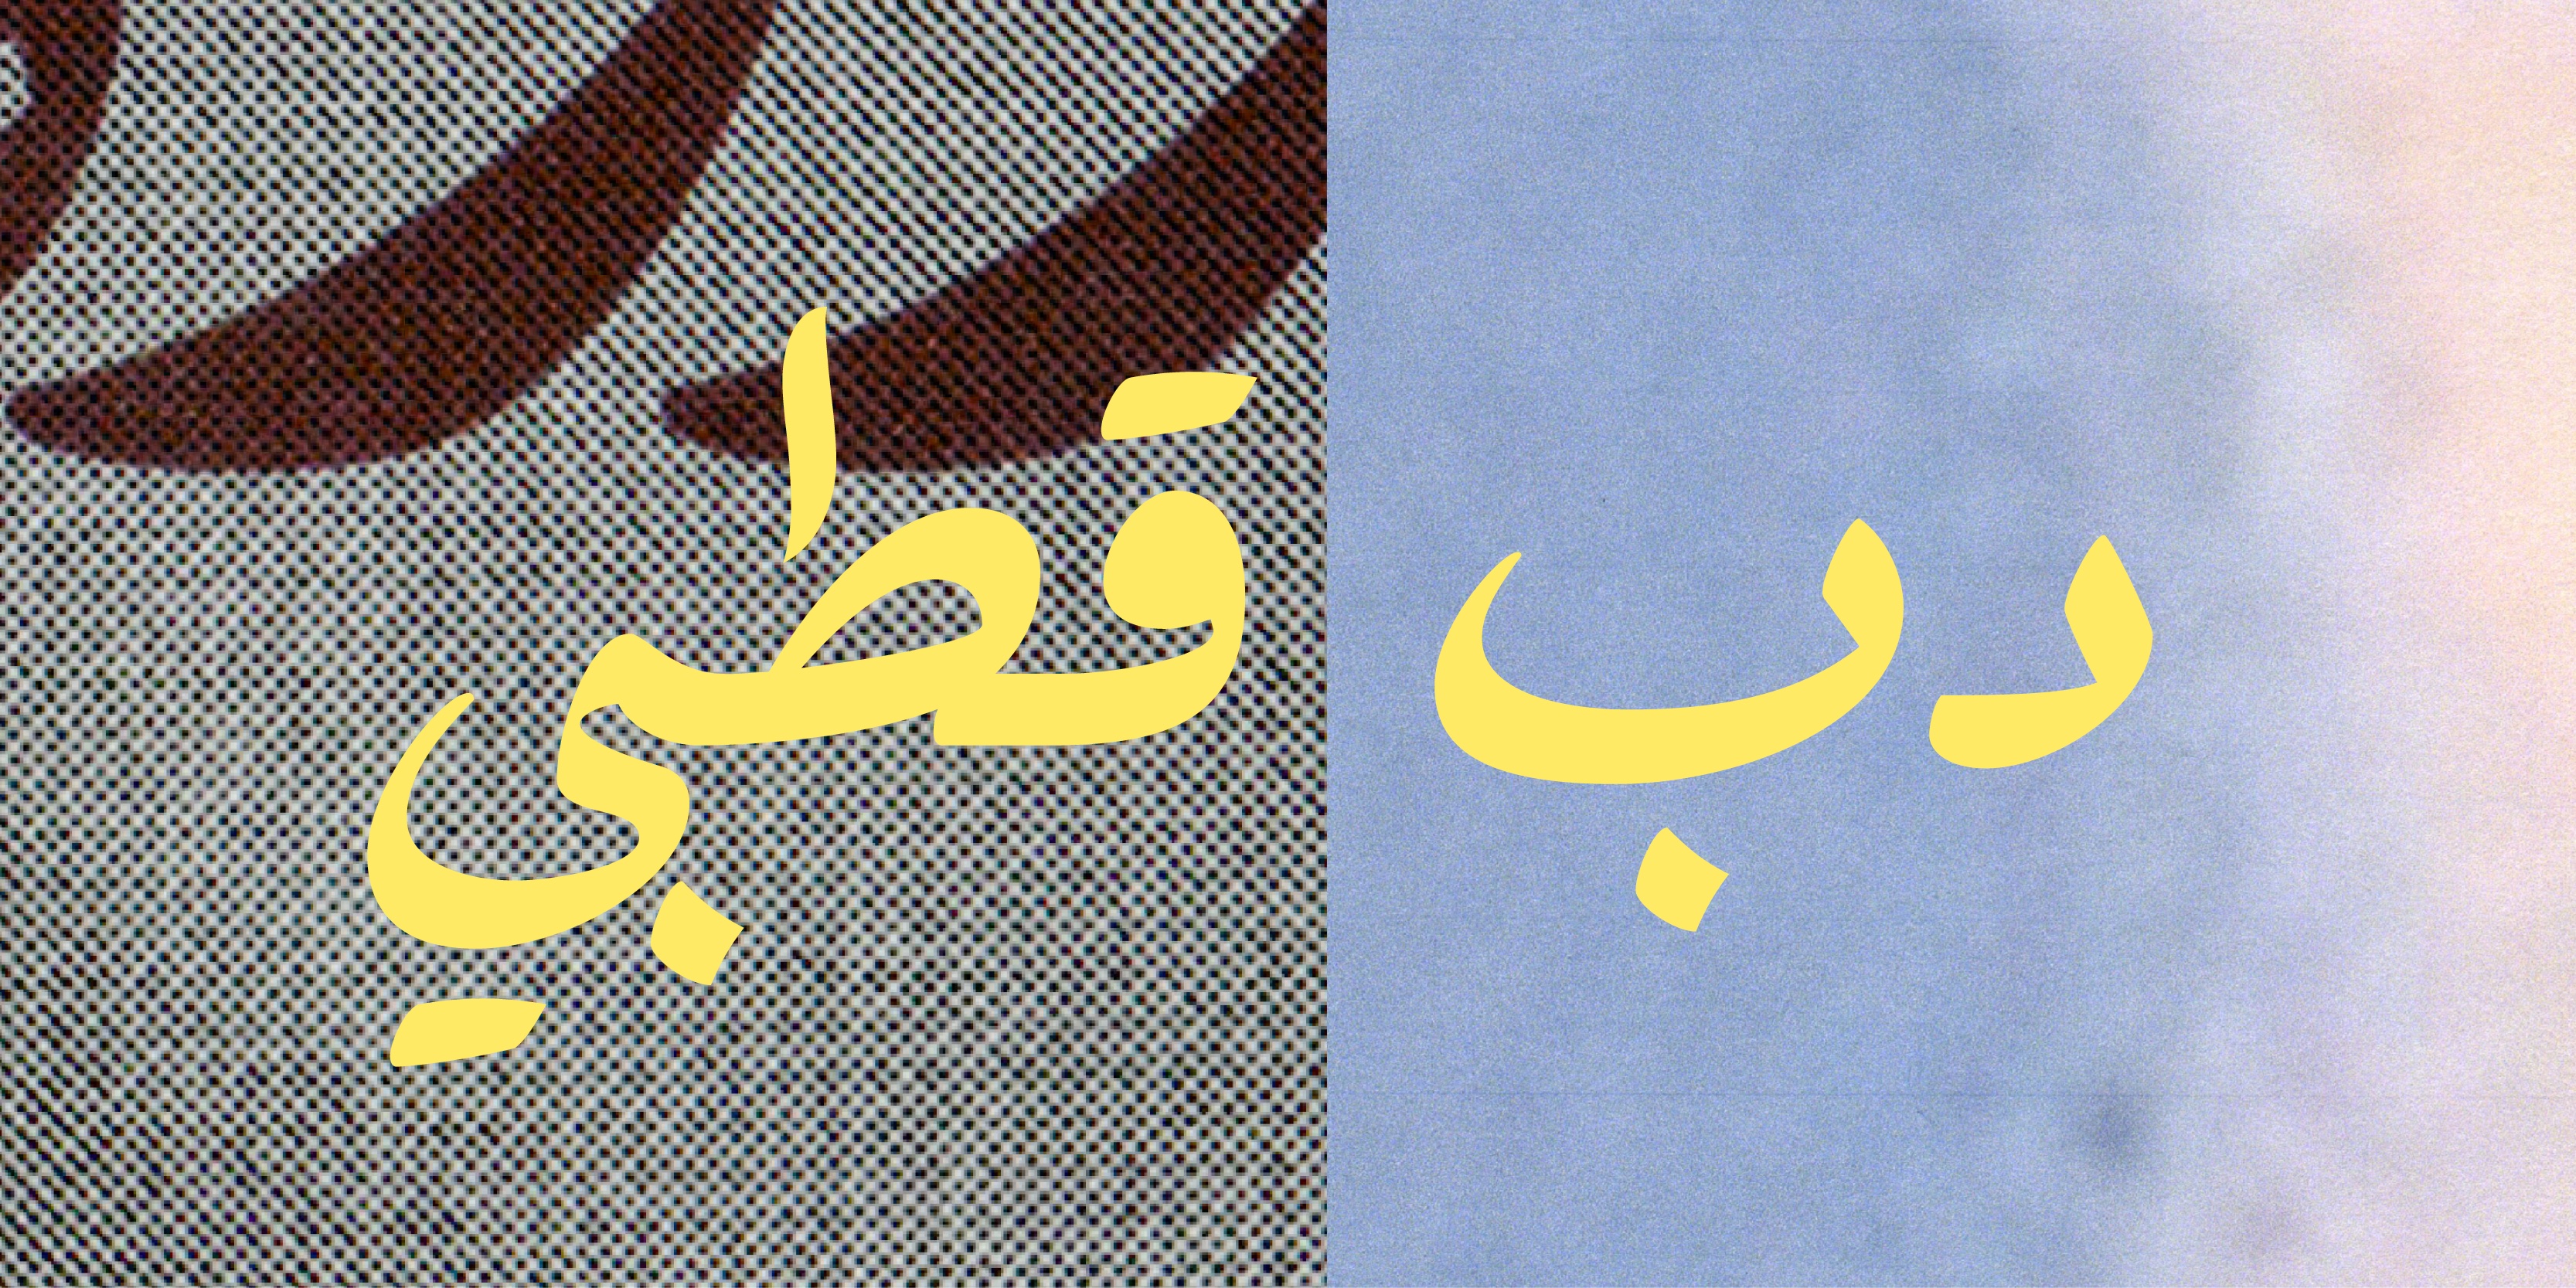 Card displaying Layaan Arabic typeface in various styles